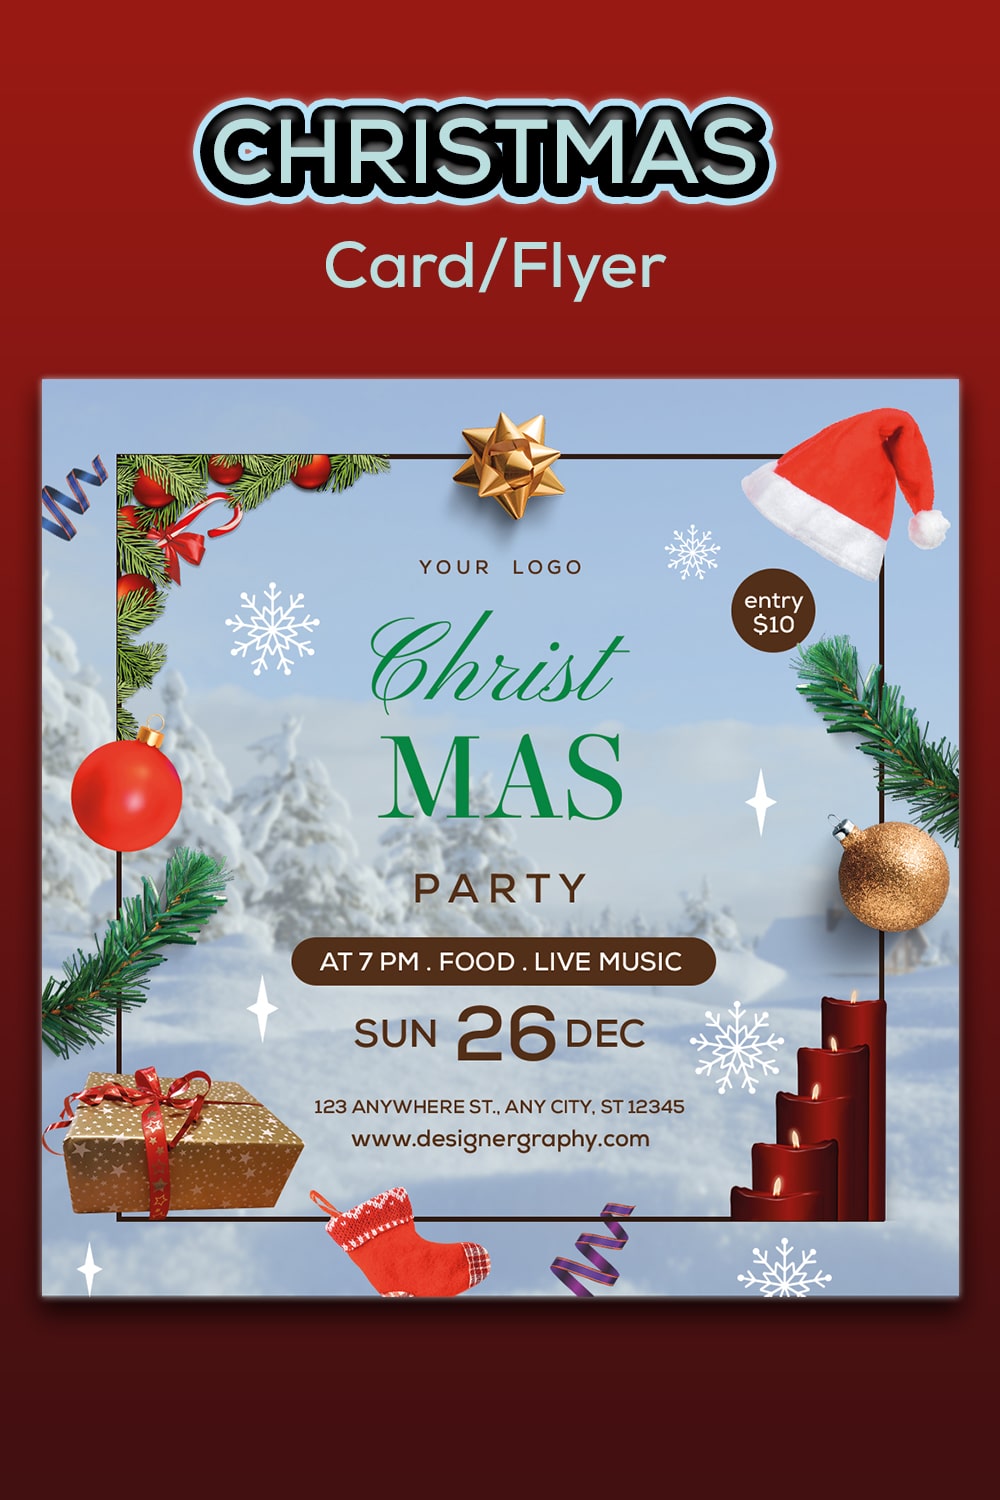 Printable Christmas Event Party Flyer pinterest image.